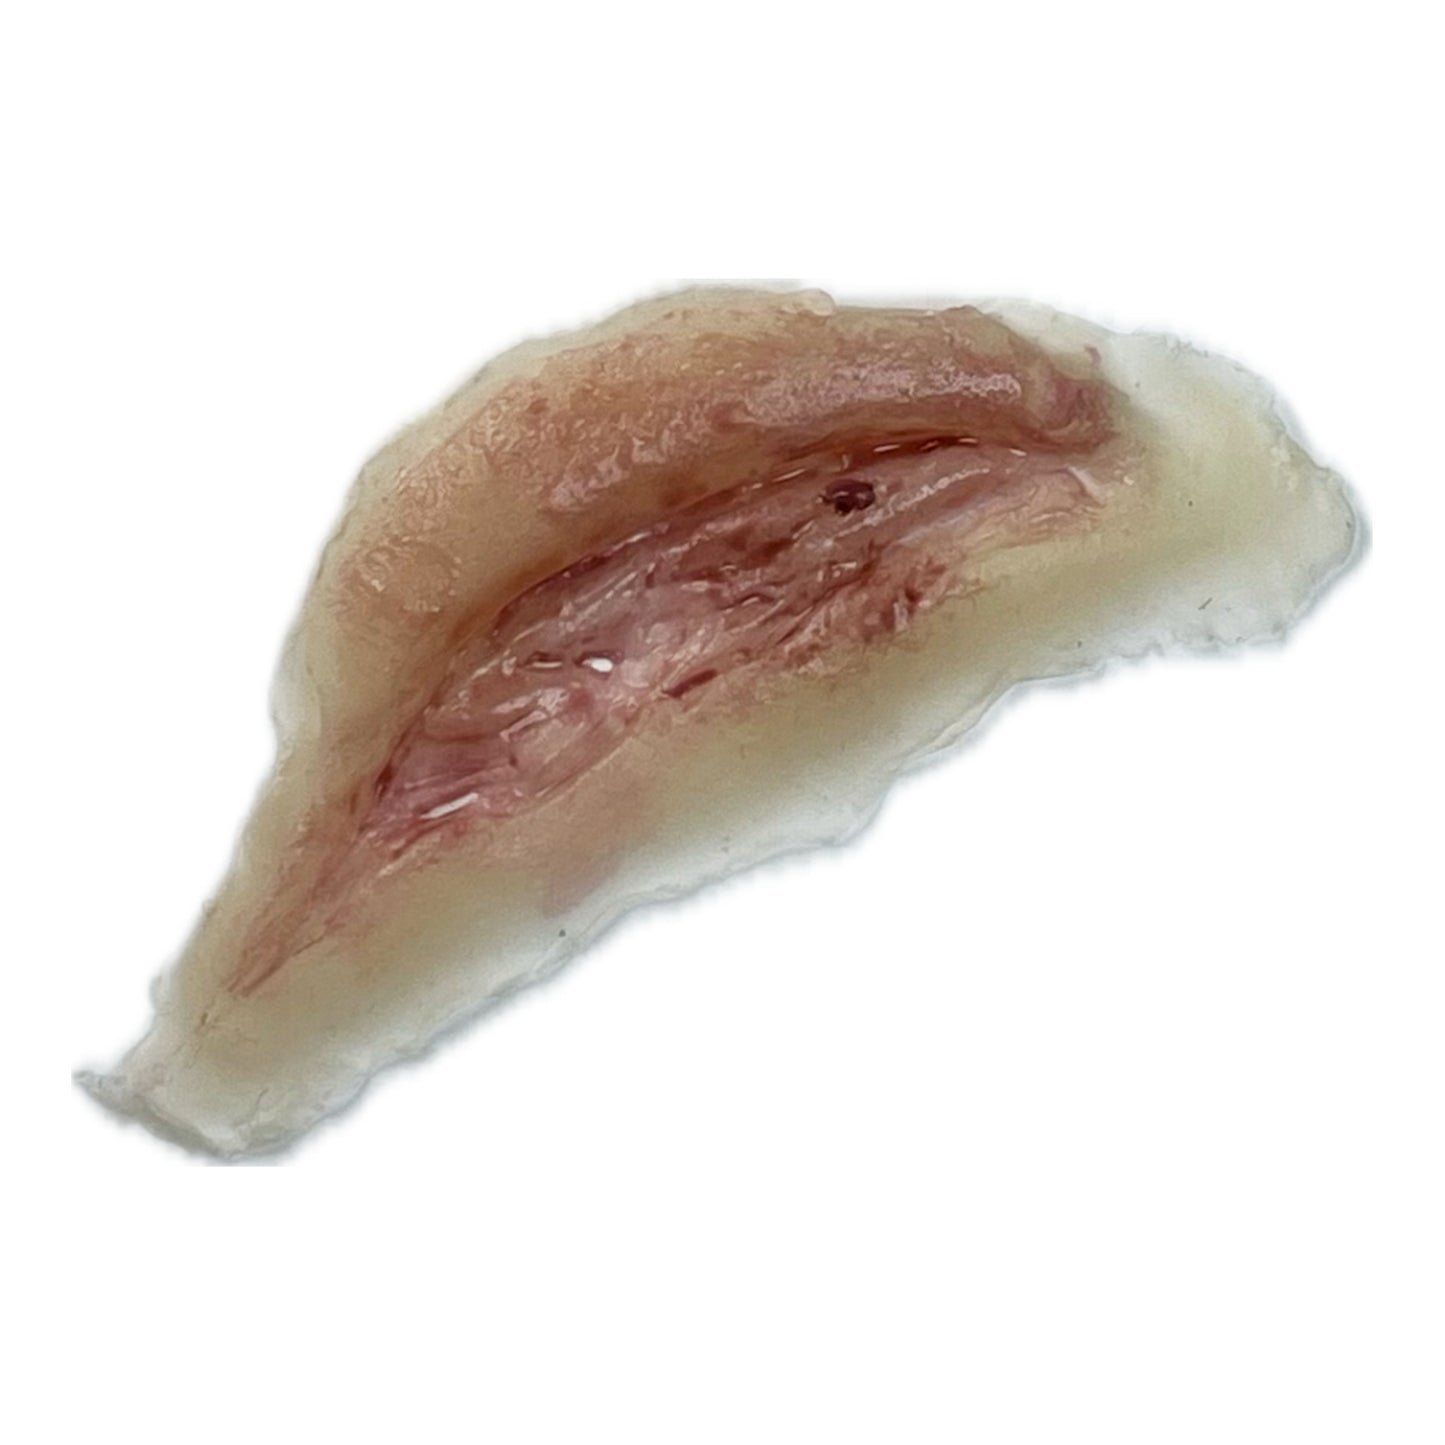 Small Slice with Skin Flap